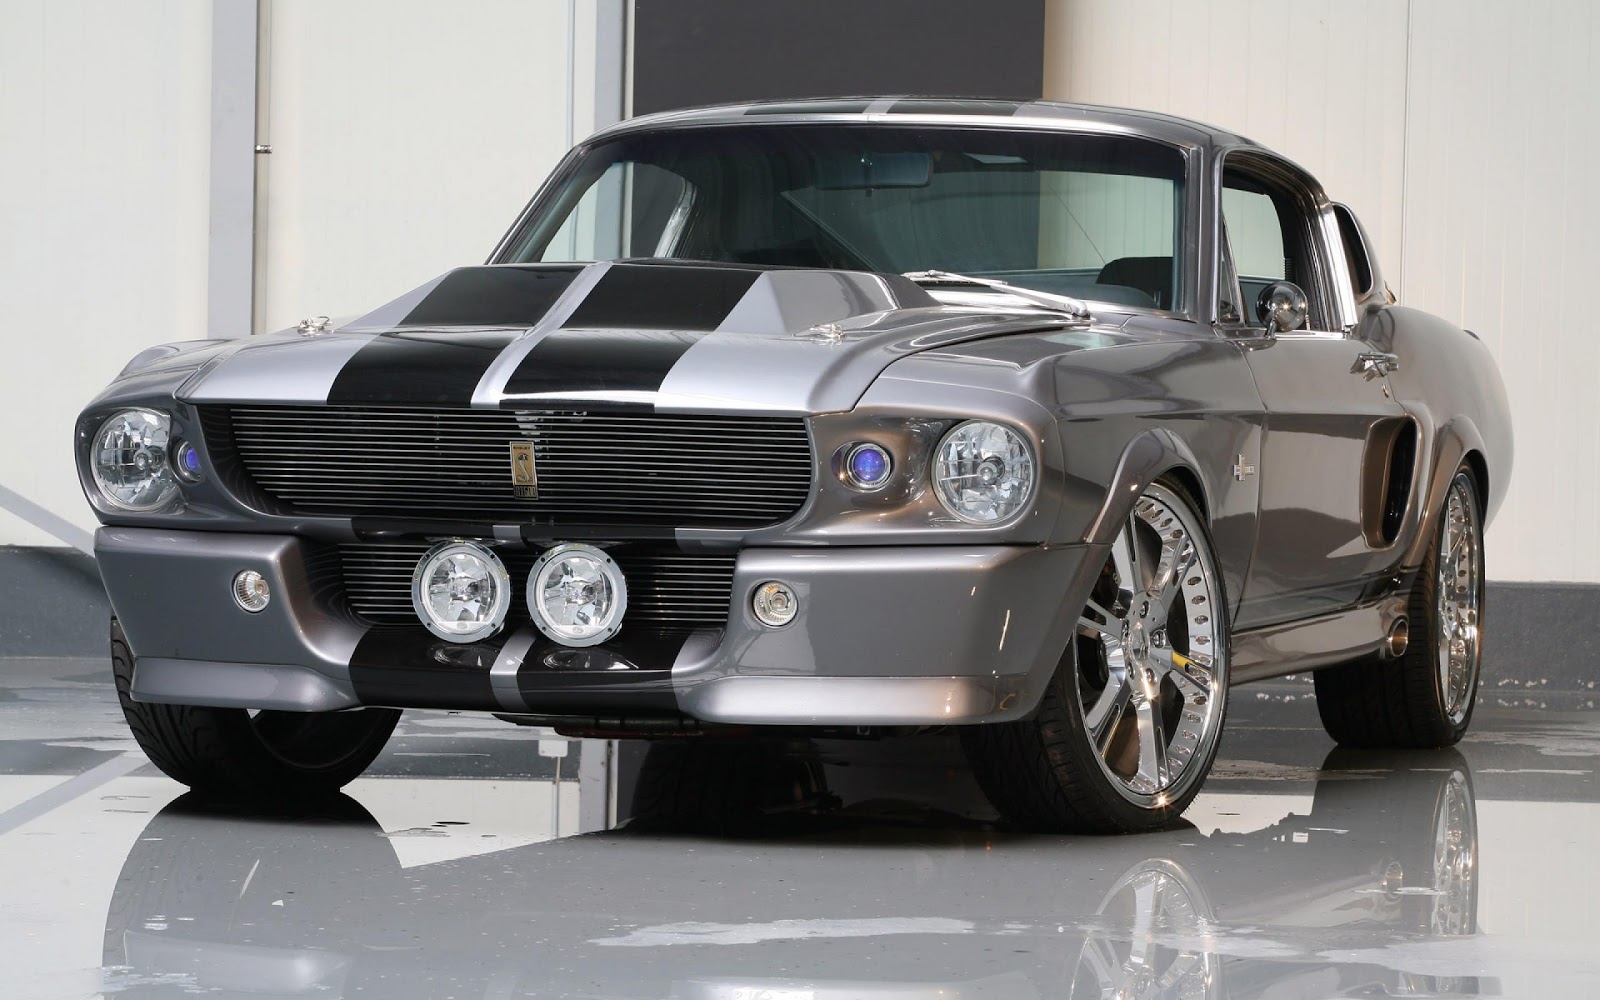 Ford shelby mustang gt500 del 67